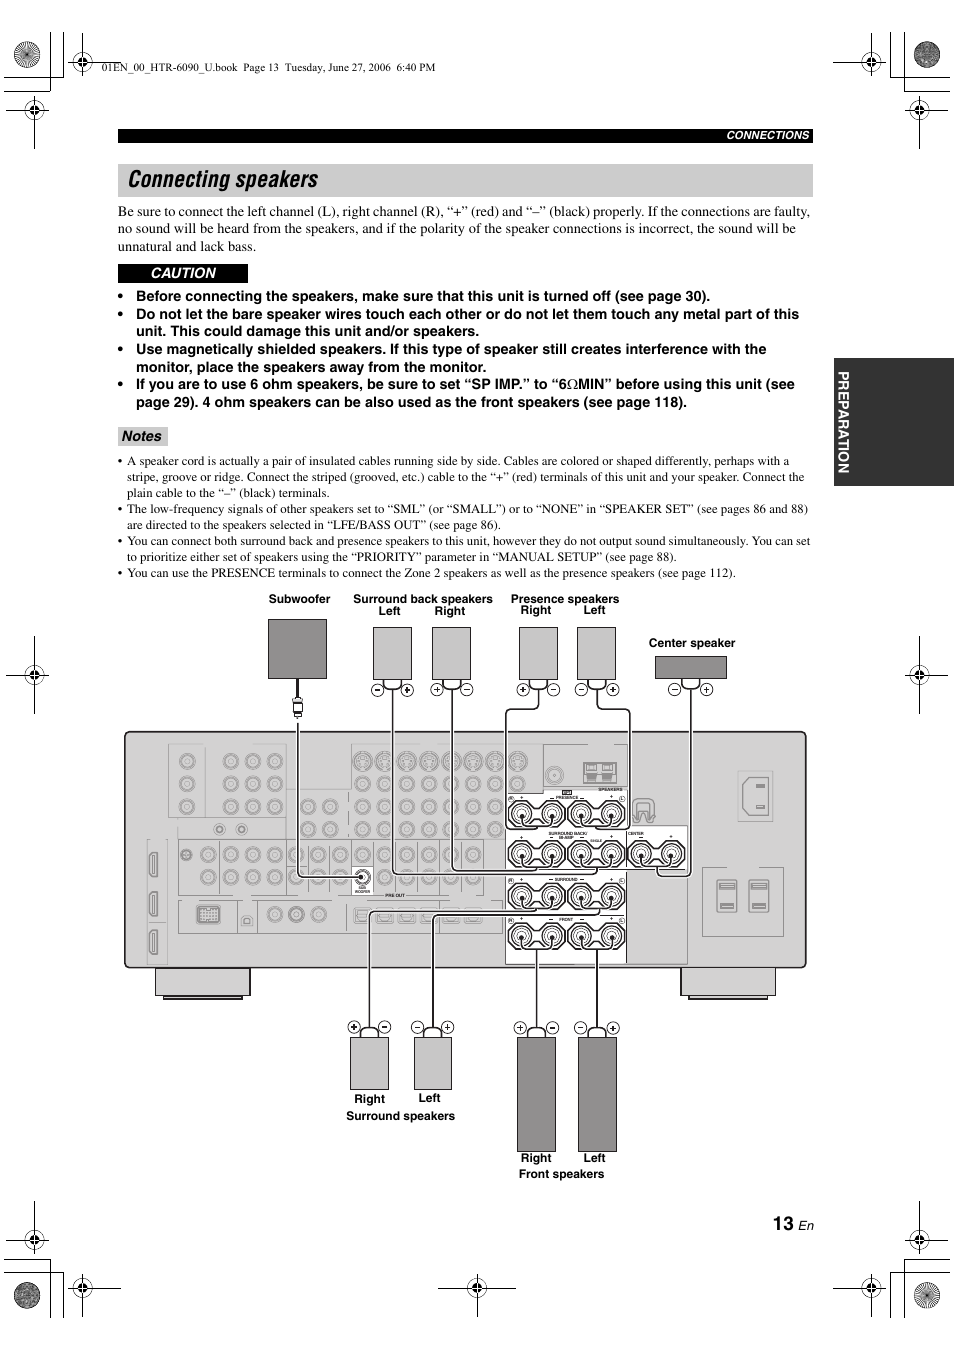 Connecting speakers | Yamaha HTR-6090 User Manual | Page 17 / 152